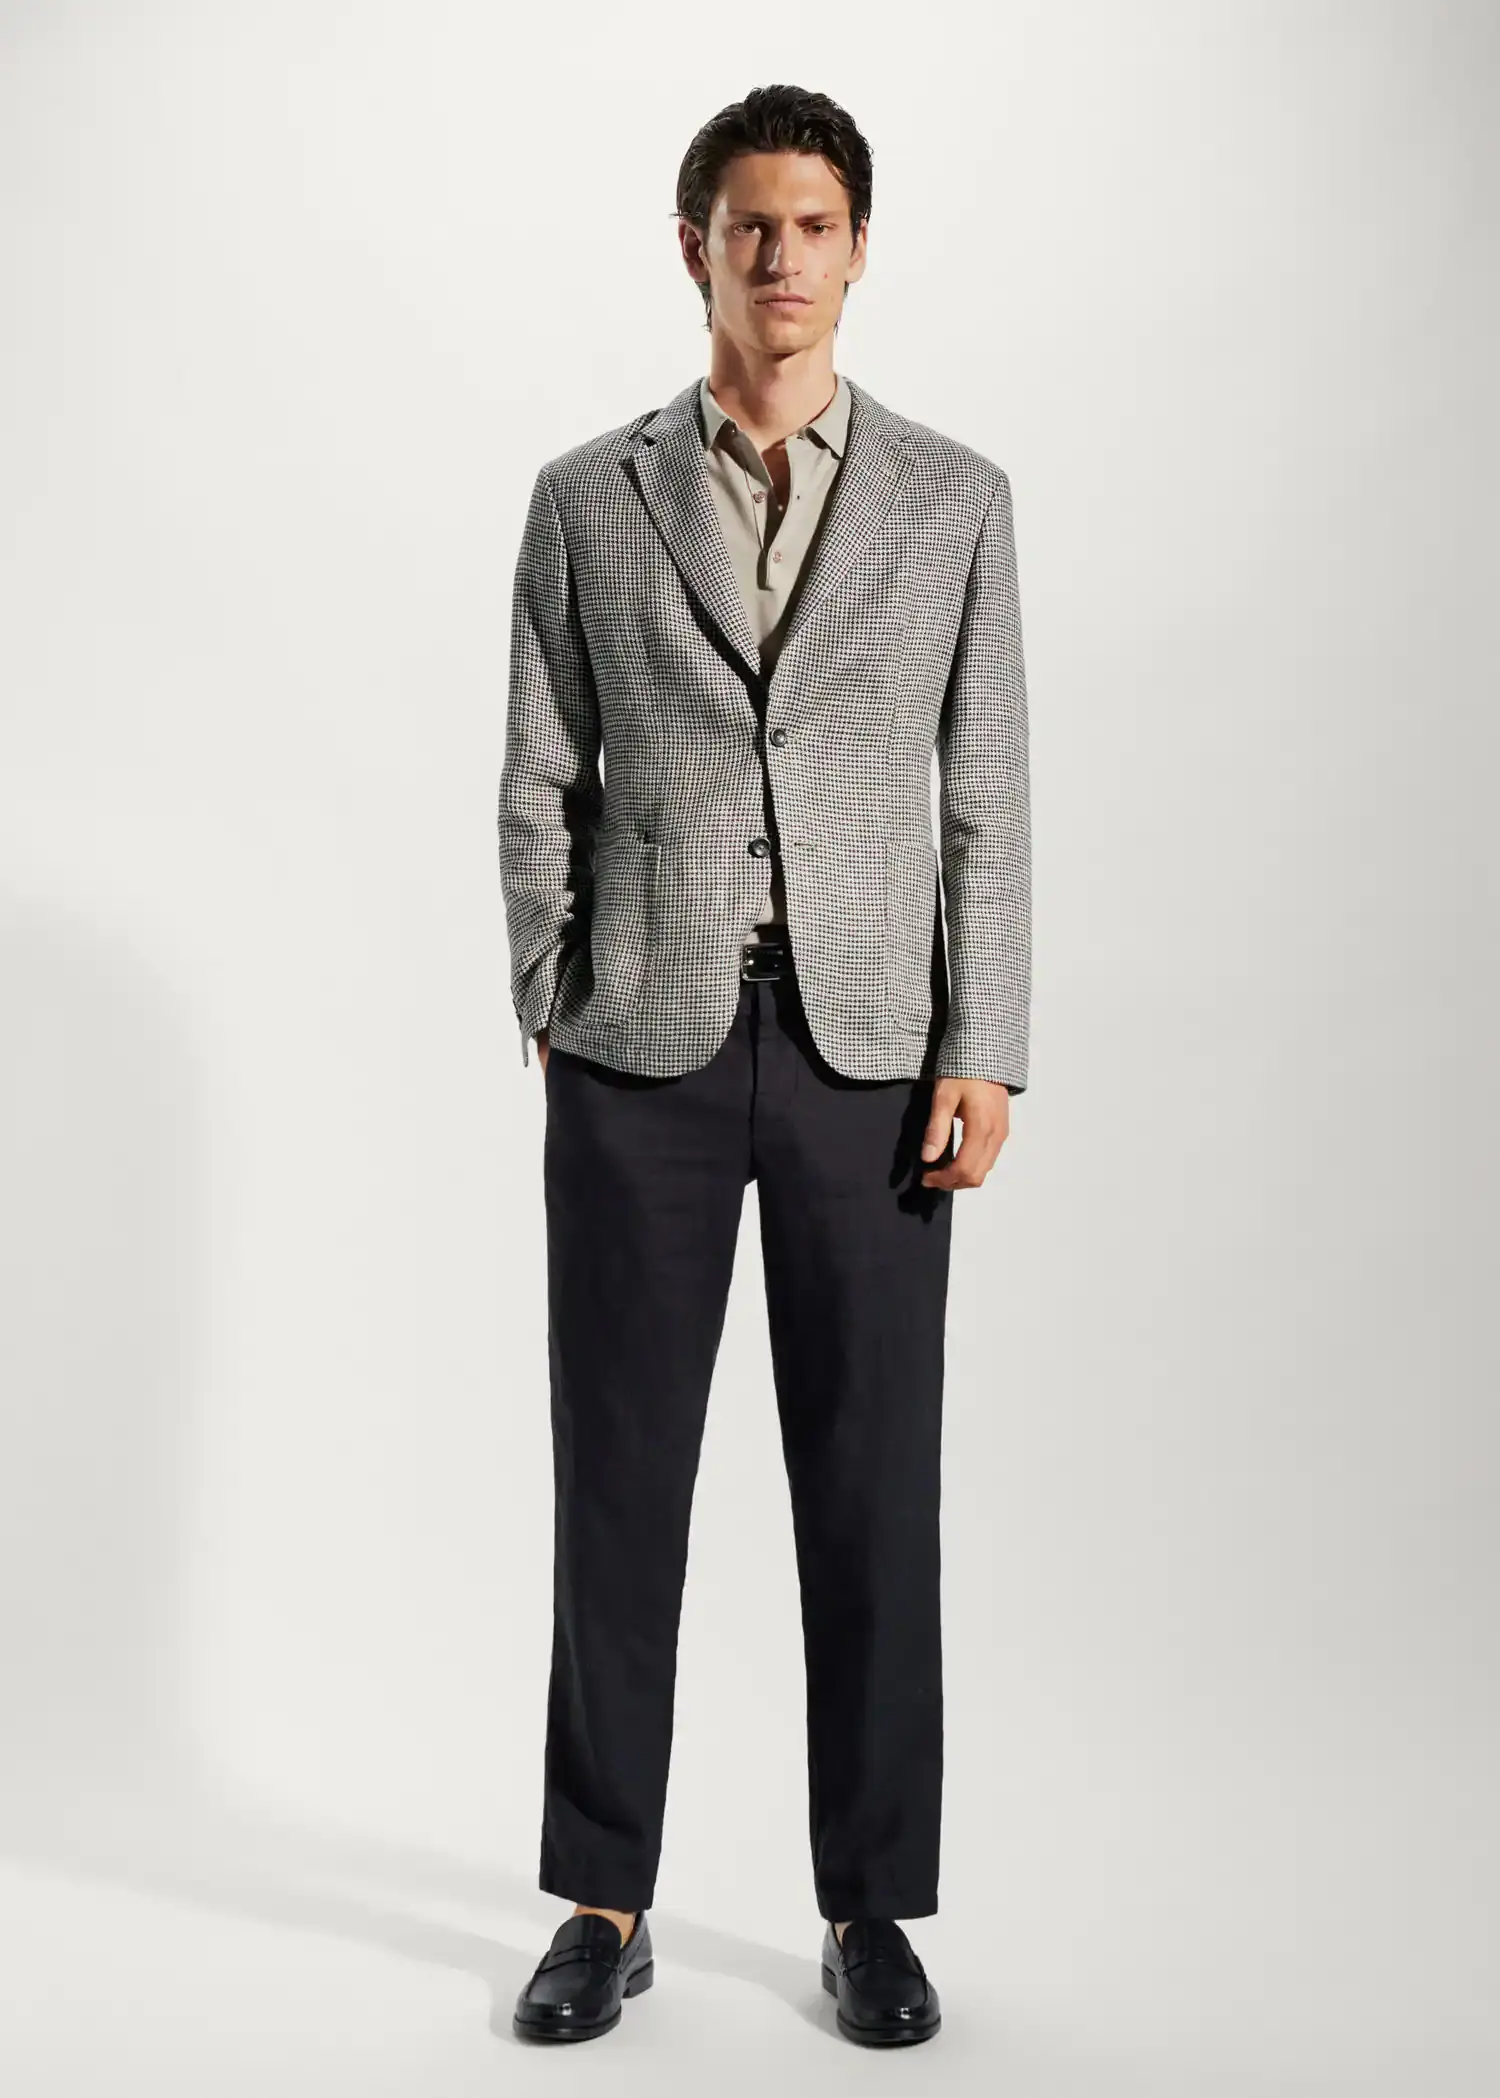 Mango 100% linen micro-houndstooth blazer. a man wearing a suit and tie standing in front of a white wall. 